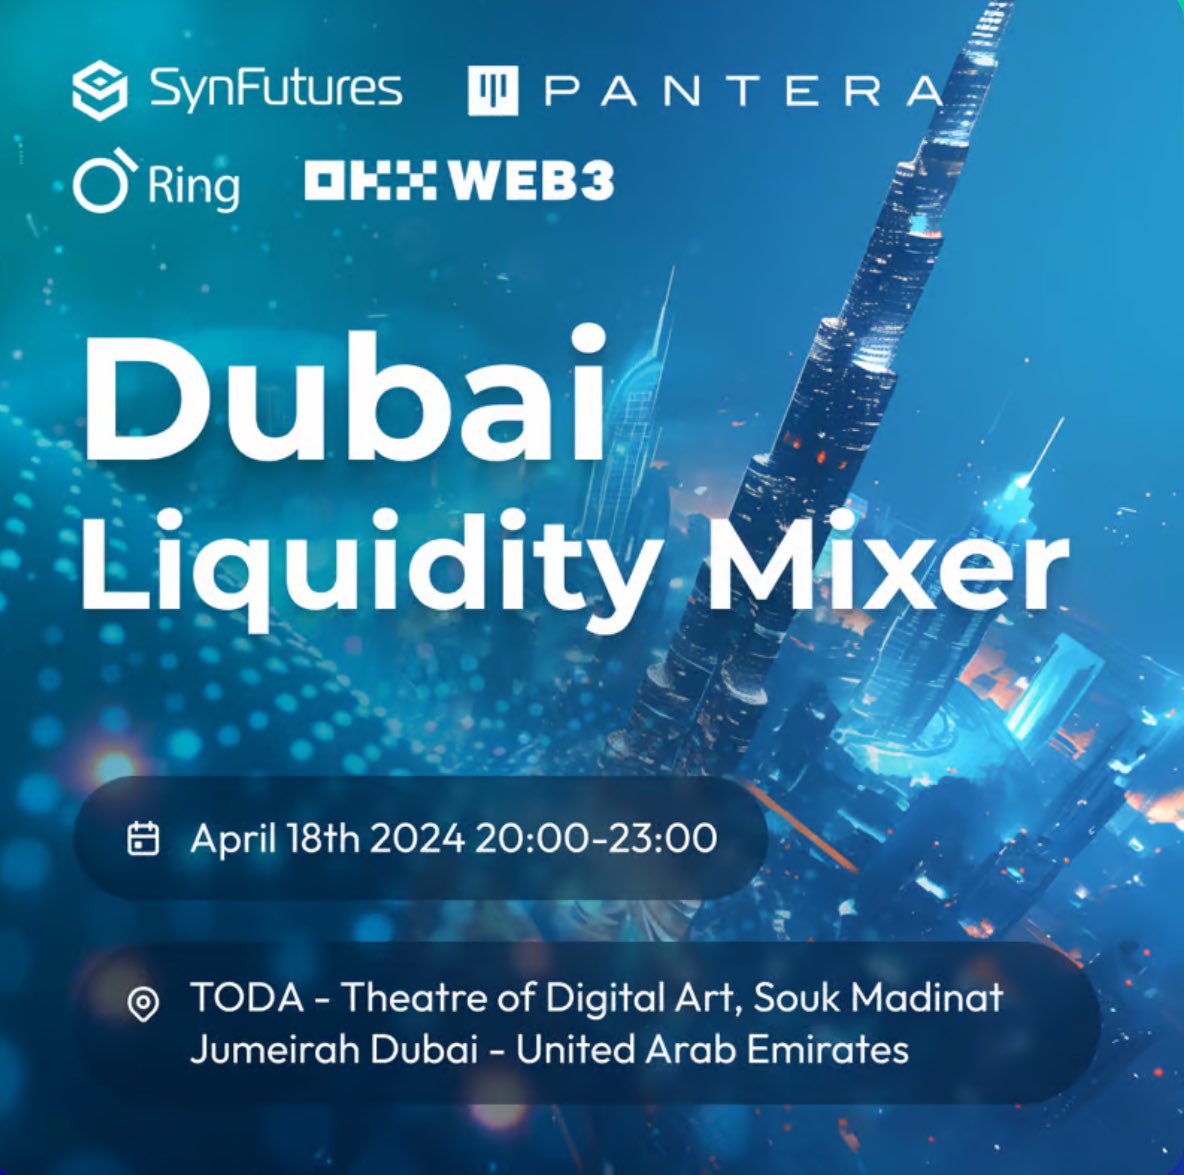 📣ARE YOU READY TO PARTY LIKE IT’S 2049? Ring Protocol teams up with @SynFuturesDefi, @PanteraCapital, & @okxweb3 to put up the biggest bash on the “block”! 🗓️ APRIL 18 🕗 8-11PM GST Want to party with us? Reply on this post or DM us to be considered! Limited slots only 👀